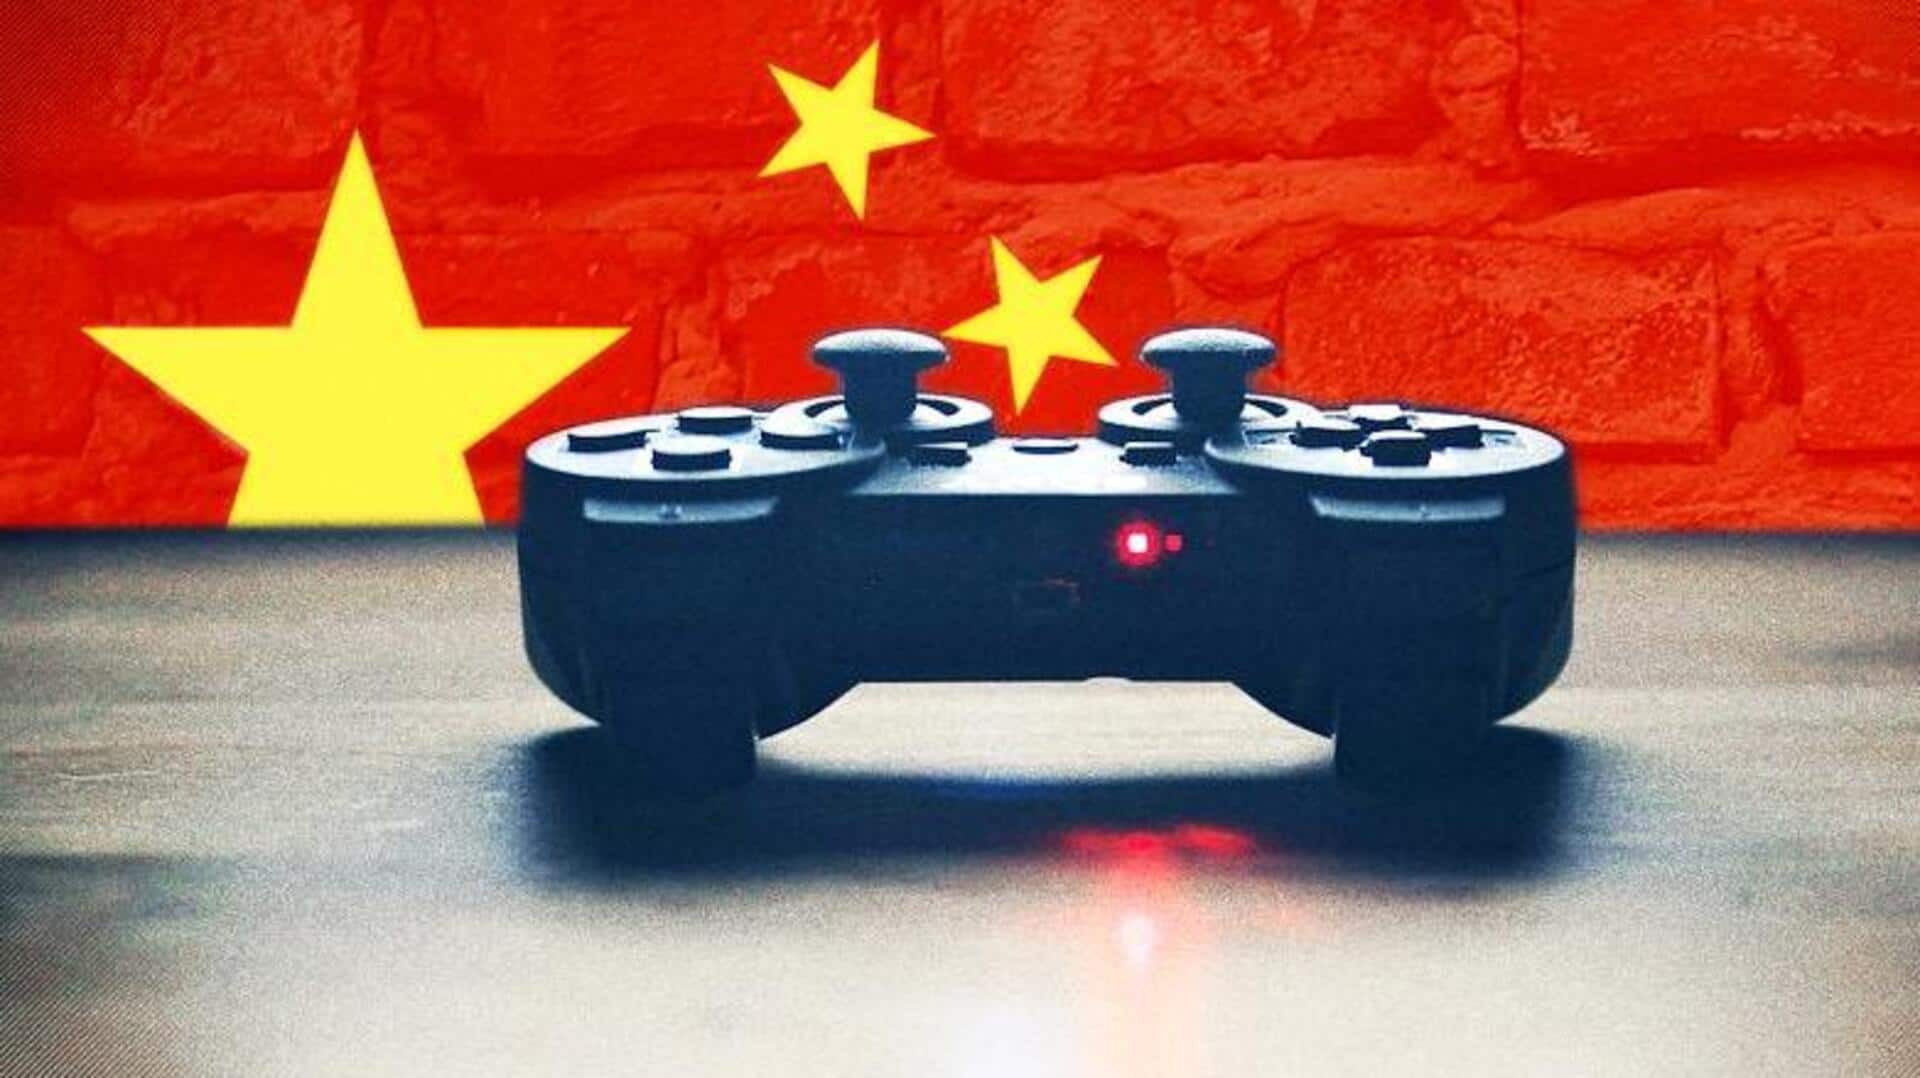 China relaxes grip on online gaming after $80bn market drop